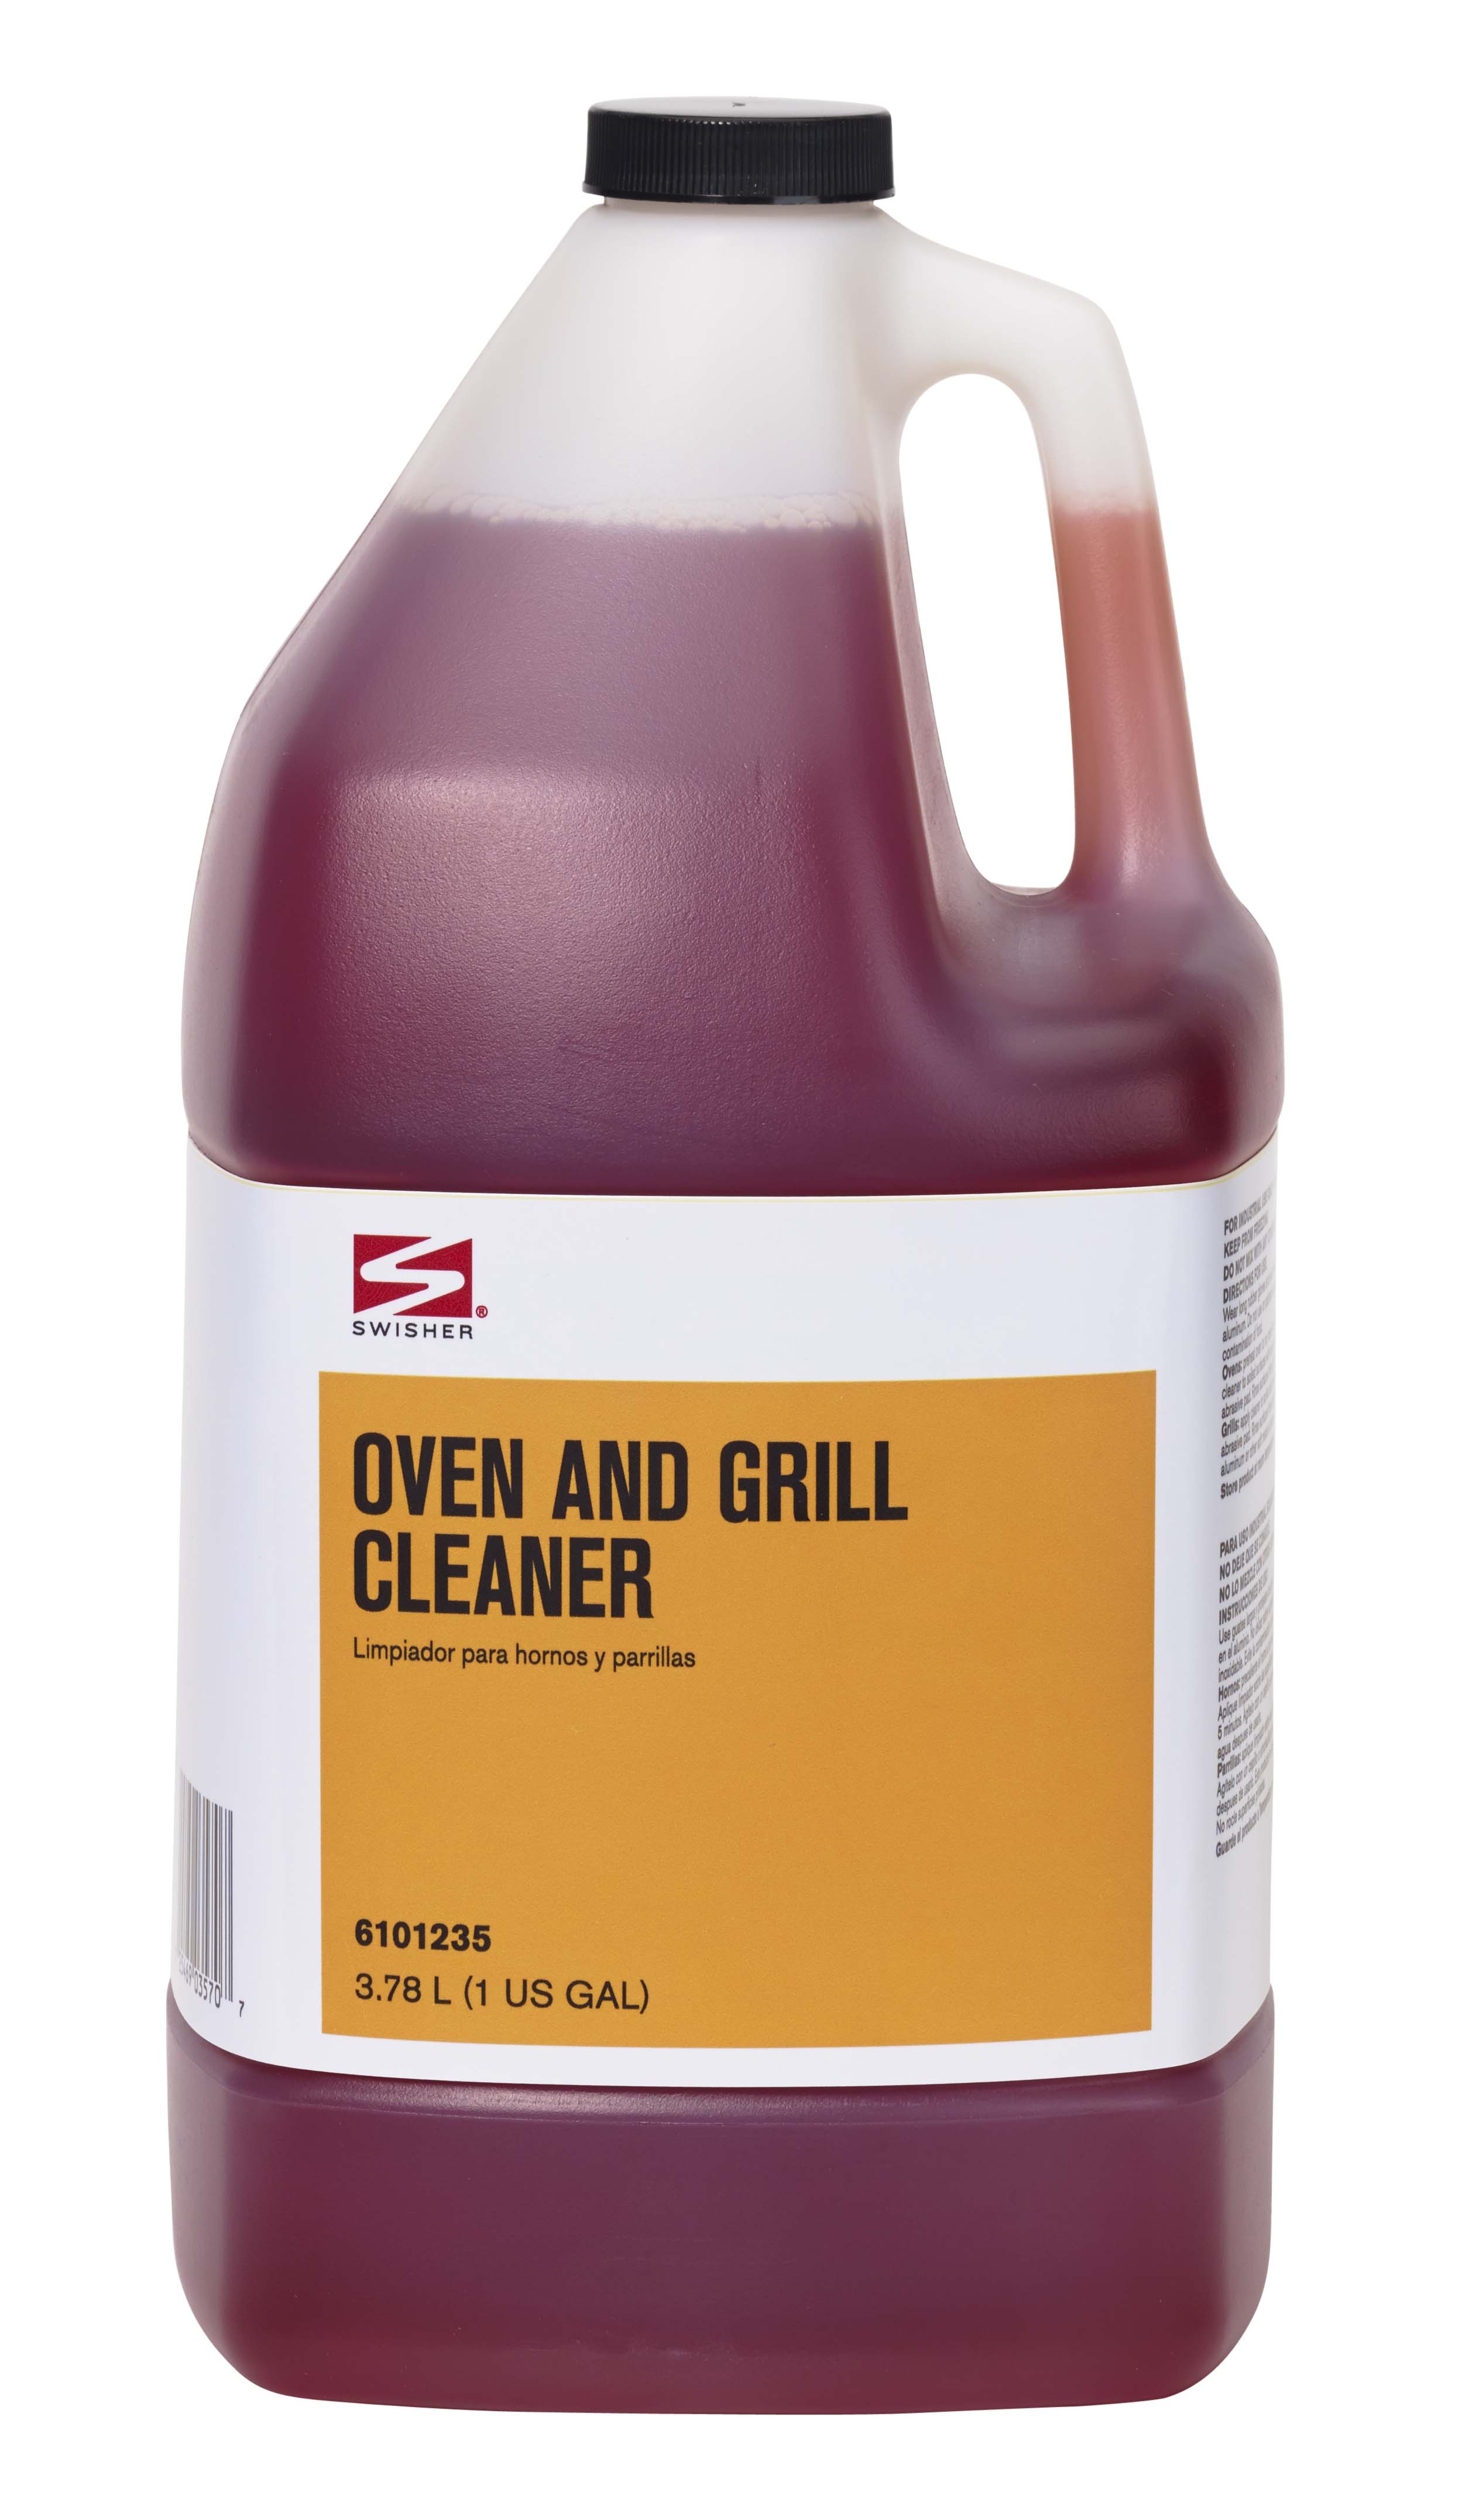 Swisher Oven and Grill Cleaner